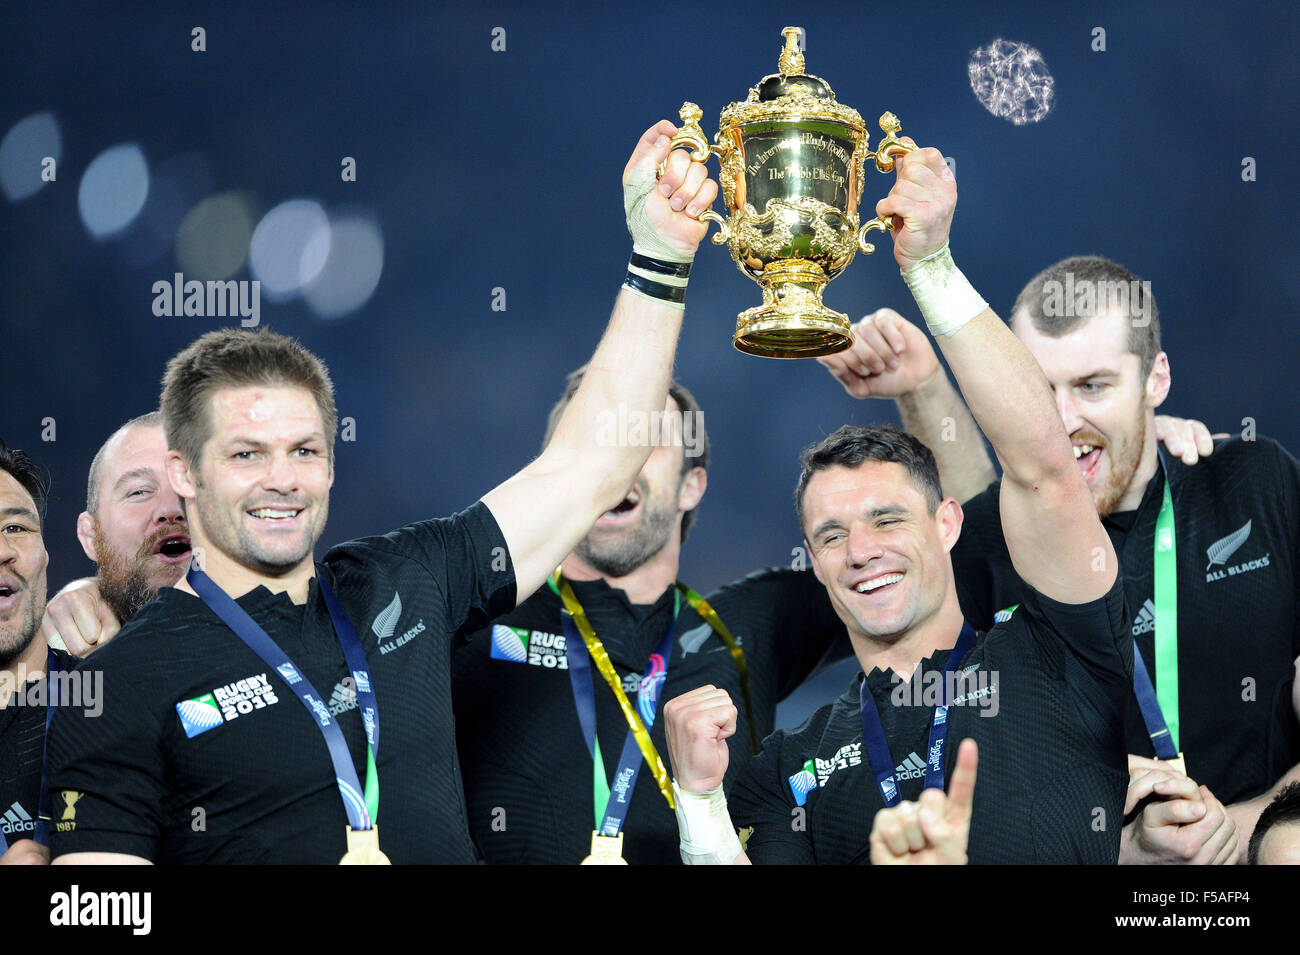 London, UK. 31st October, 2015. Richie McCaw and Dan Carter of New Zealand lift the Webb Ellis trophy after winning during the Rugby World Cup Final between New Zealand and Australia - Twickenham Stadium, London. Credit:  Cal Sport Media/Alamy Live News Stock Photo